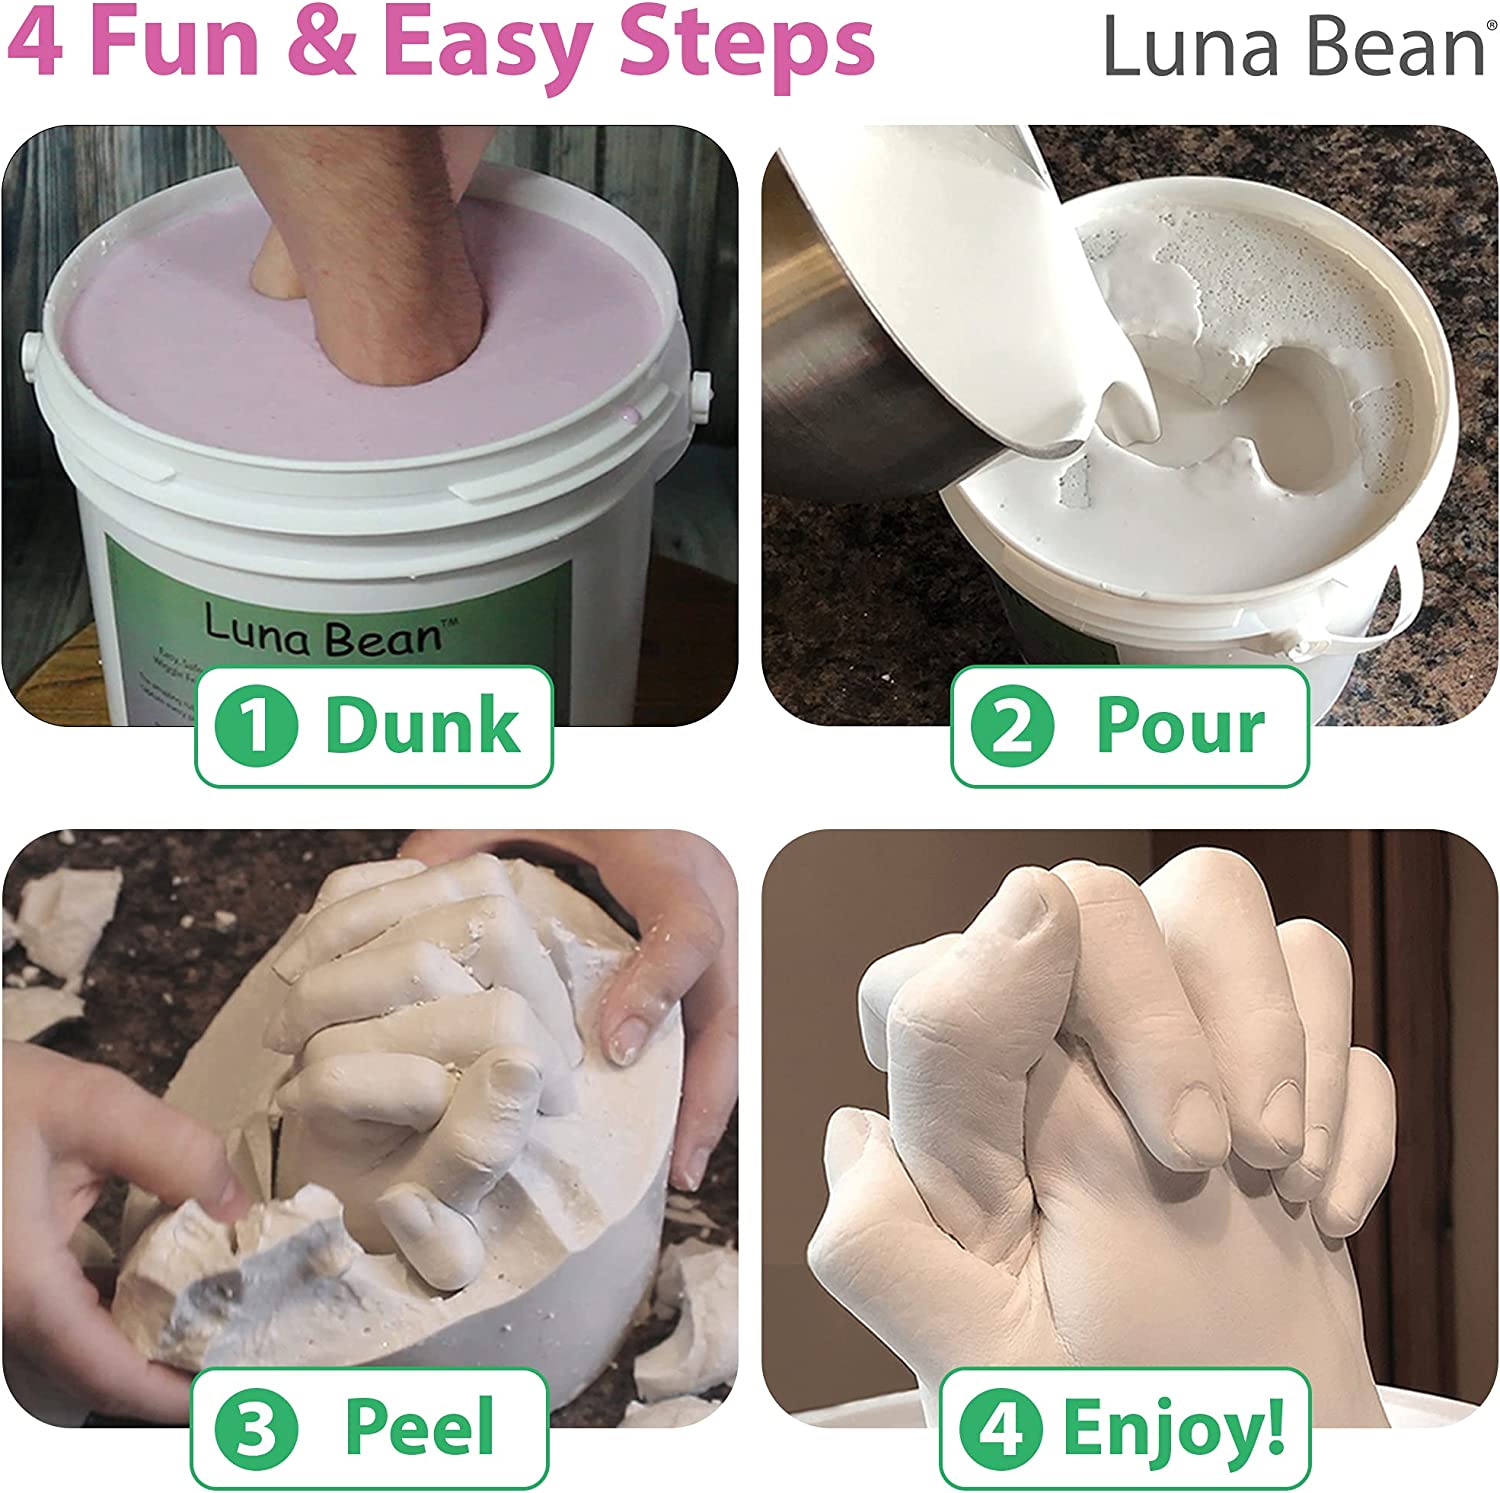  Hands Casting Kit, DIY Plaster Statue Molding Kit & Hand  Casting Kits for 2 Adult, Wedding, Friends, Anniversary, Hand Hold Casting  Kit for Holiday Activities and Perfect for Couple Gift